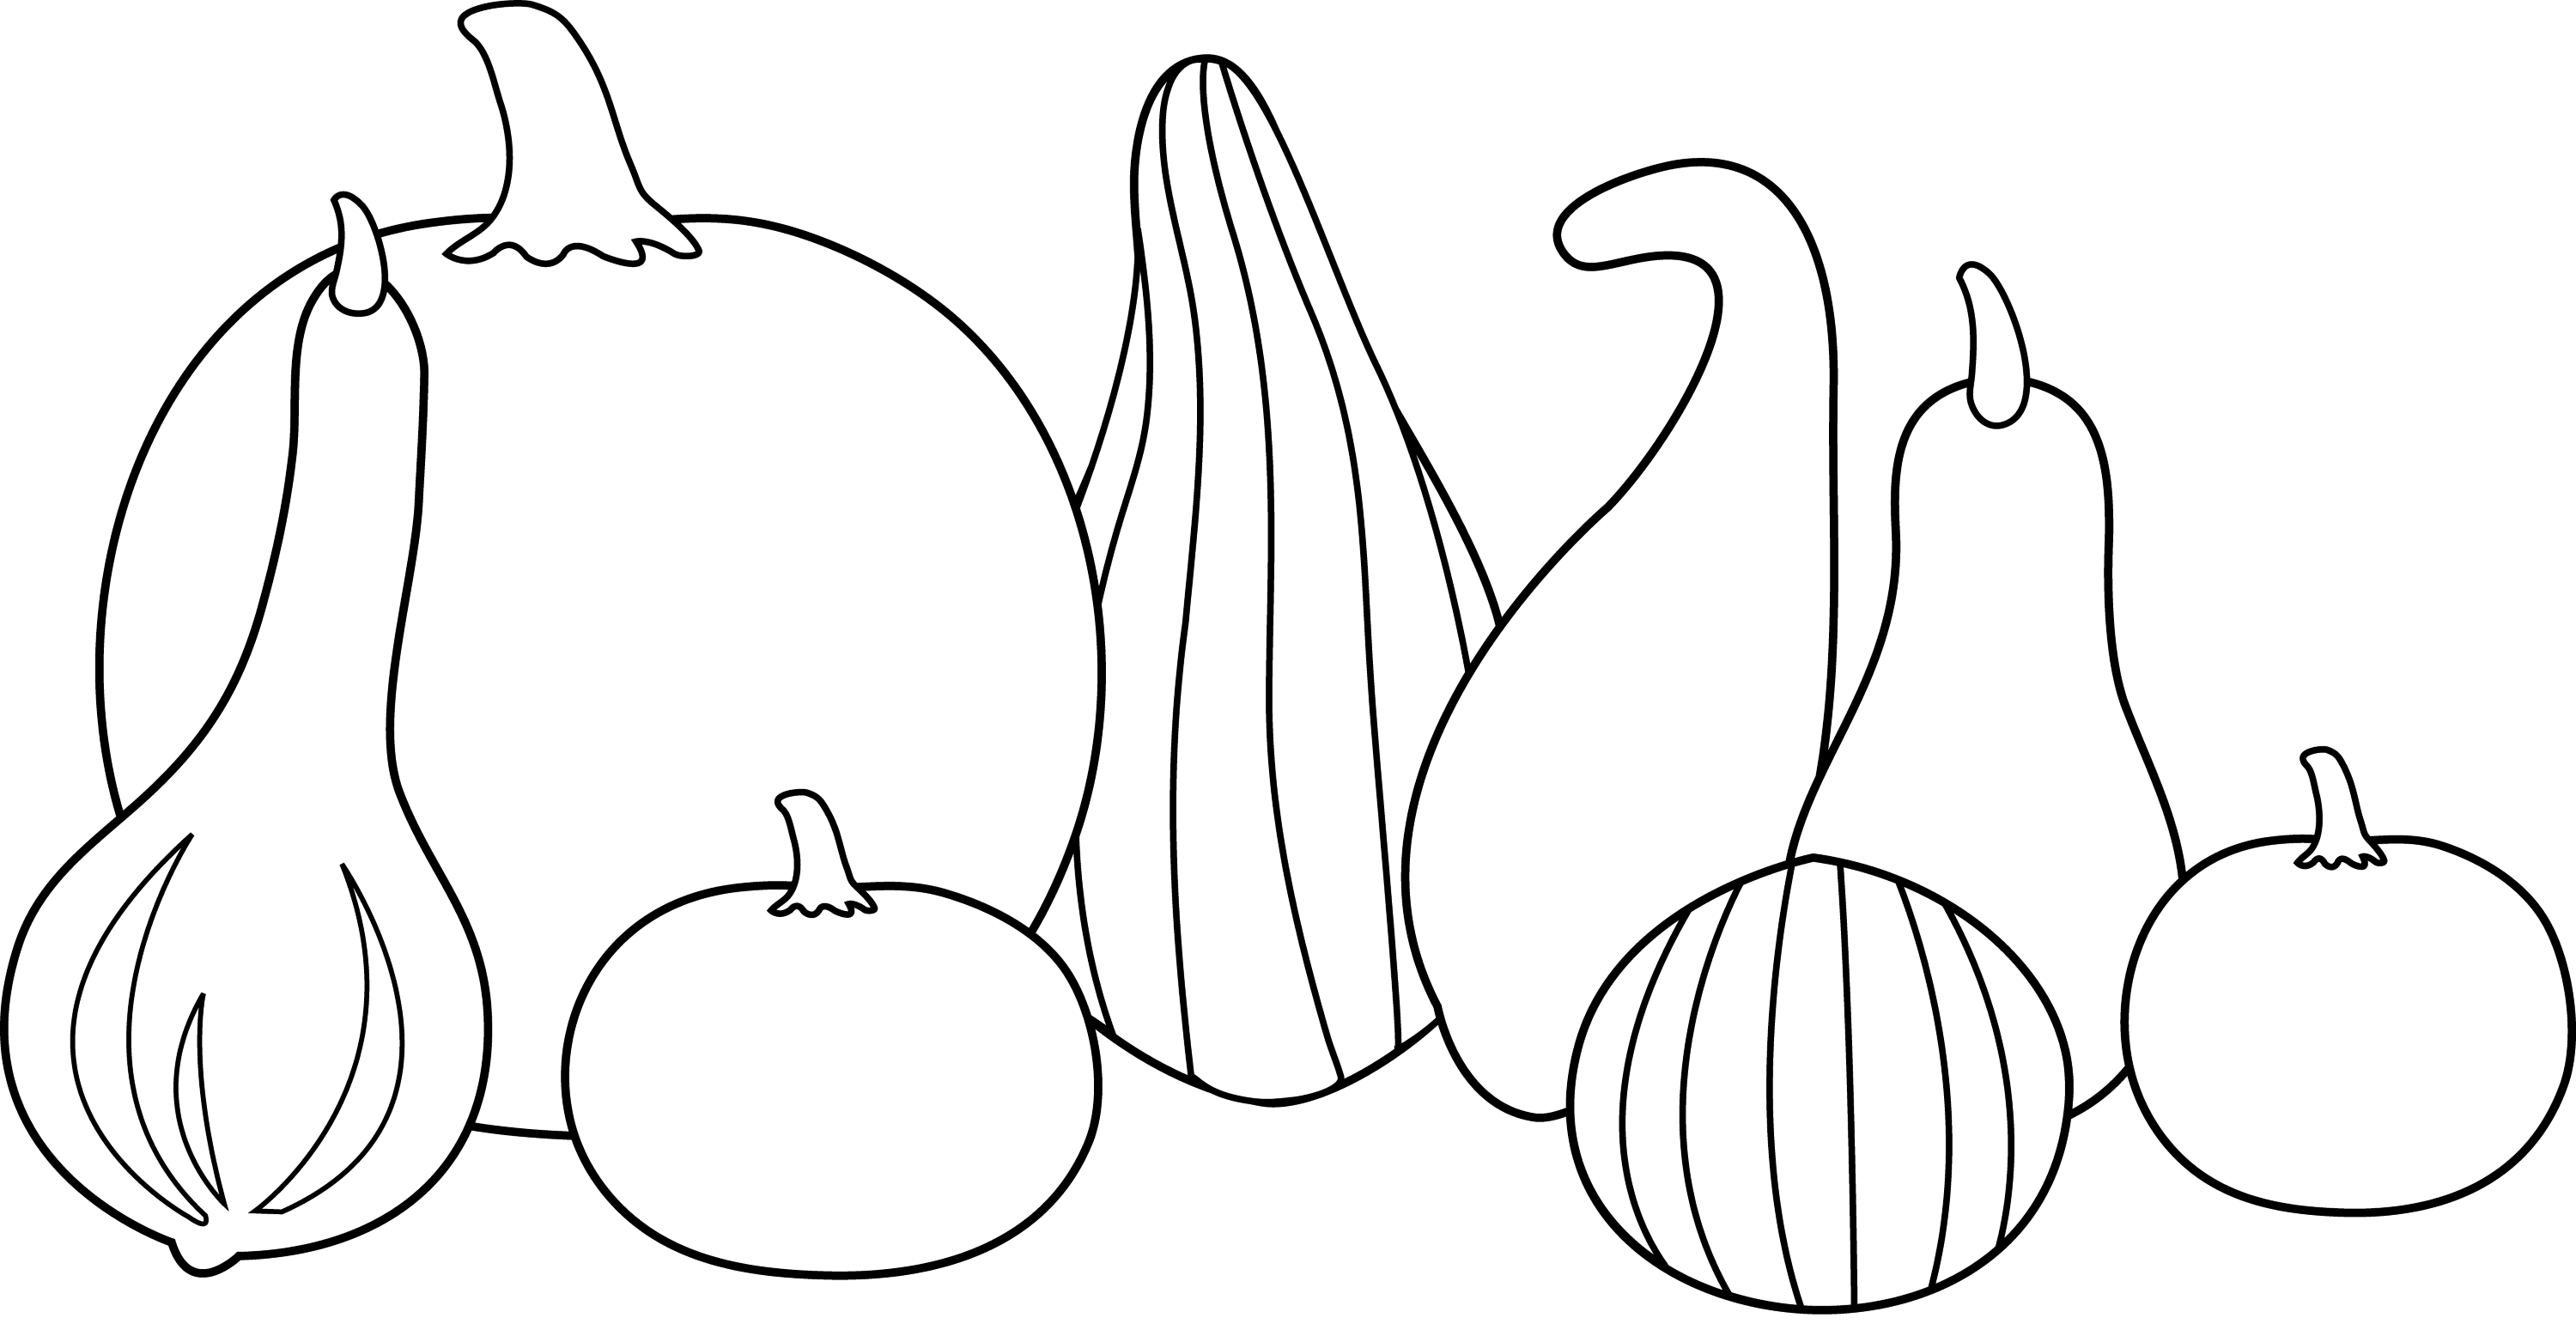 free black and white harvest clipart - photo #28